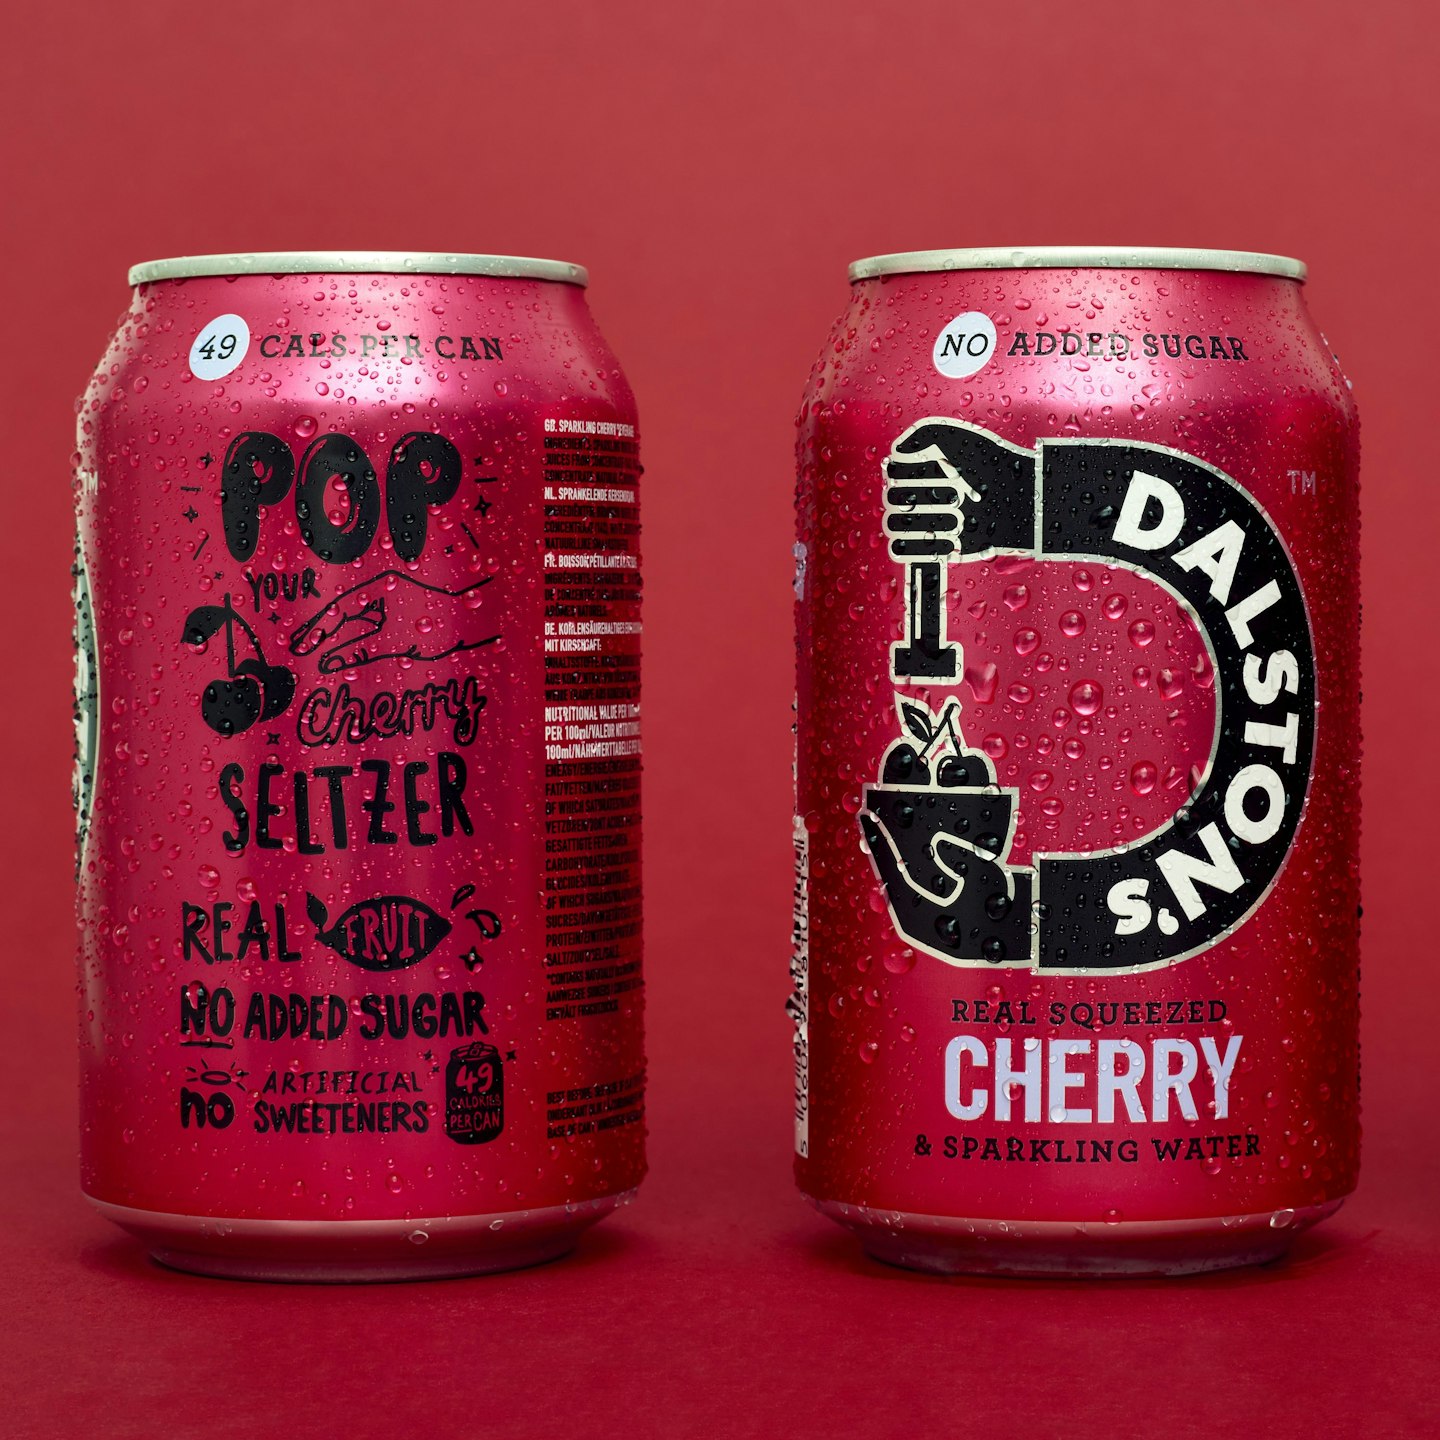 Dalston's Real Squeezed Cherry Sparkling Water